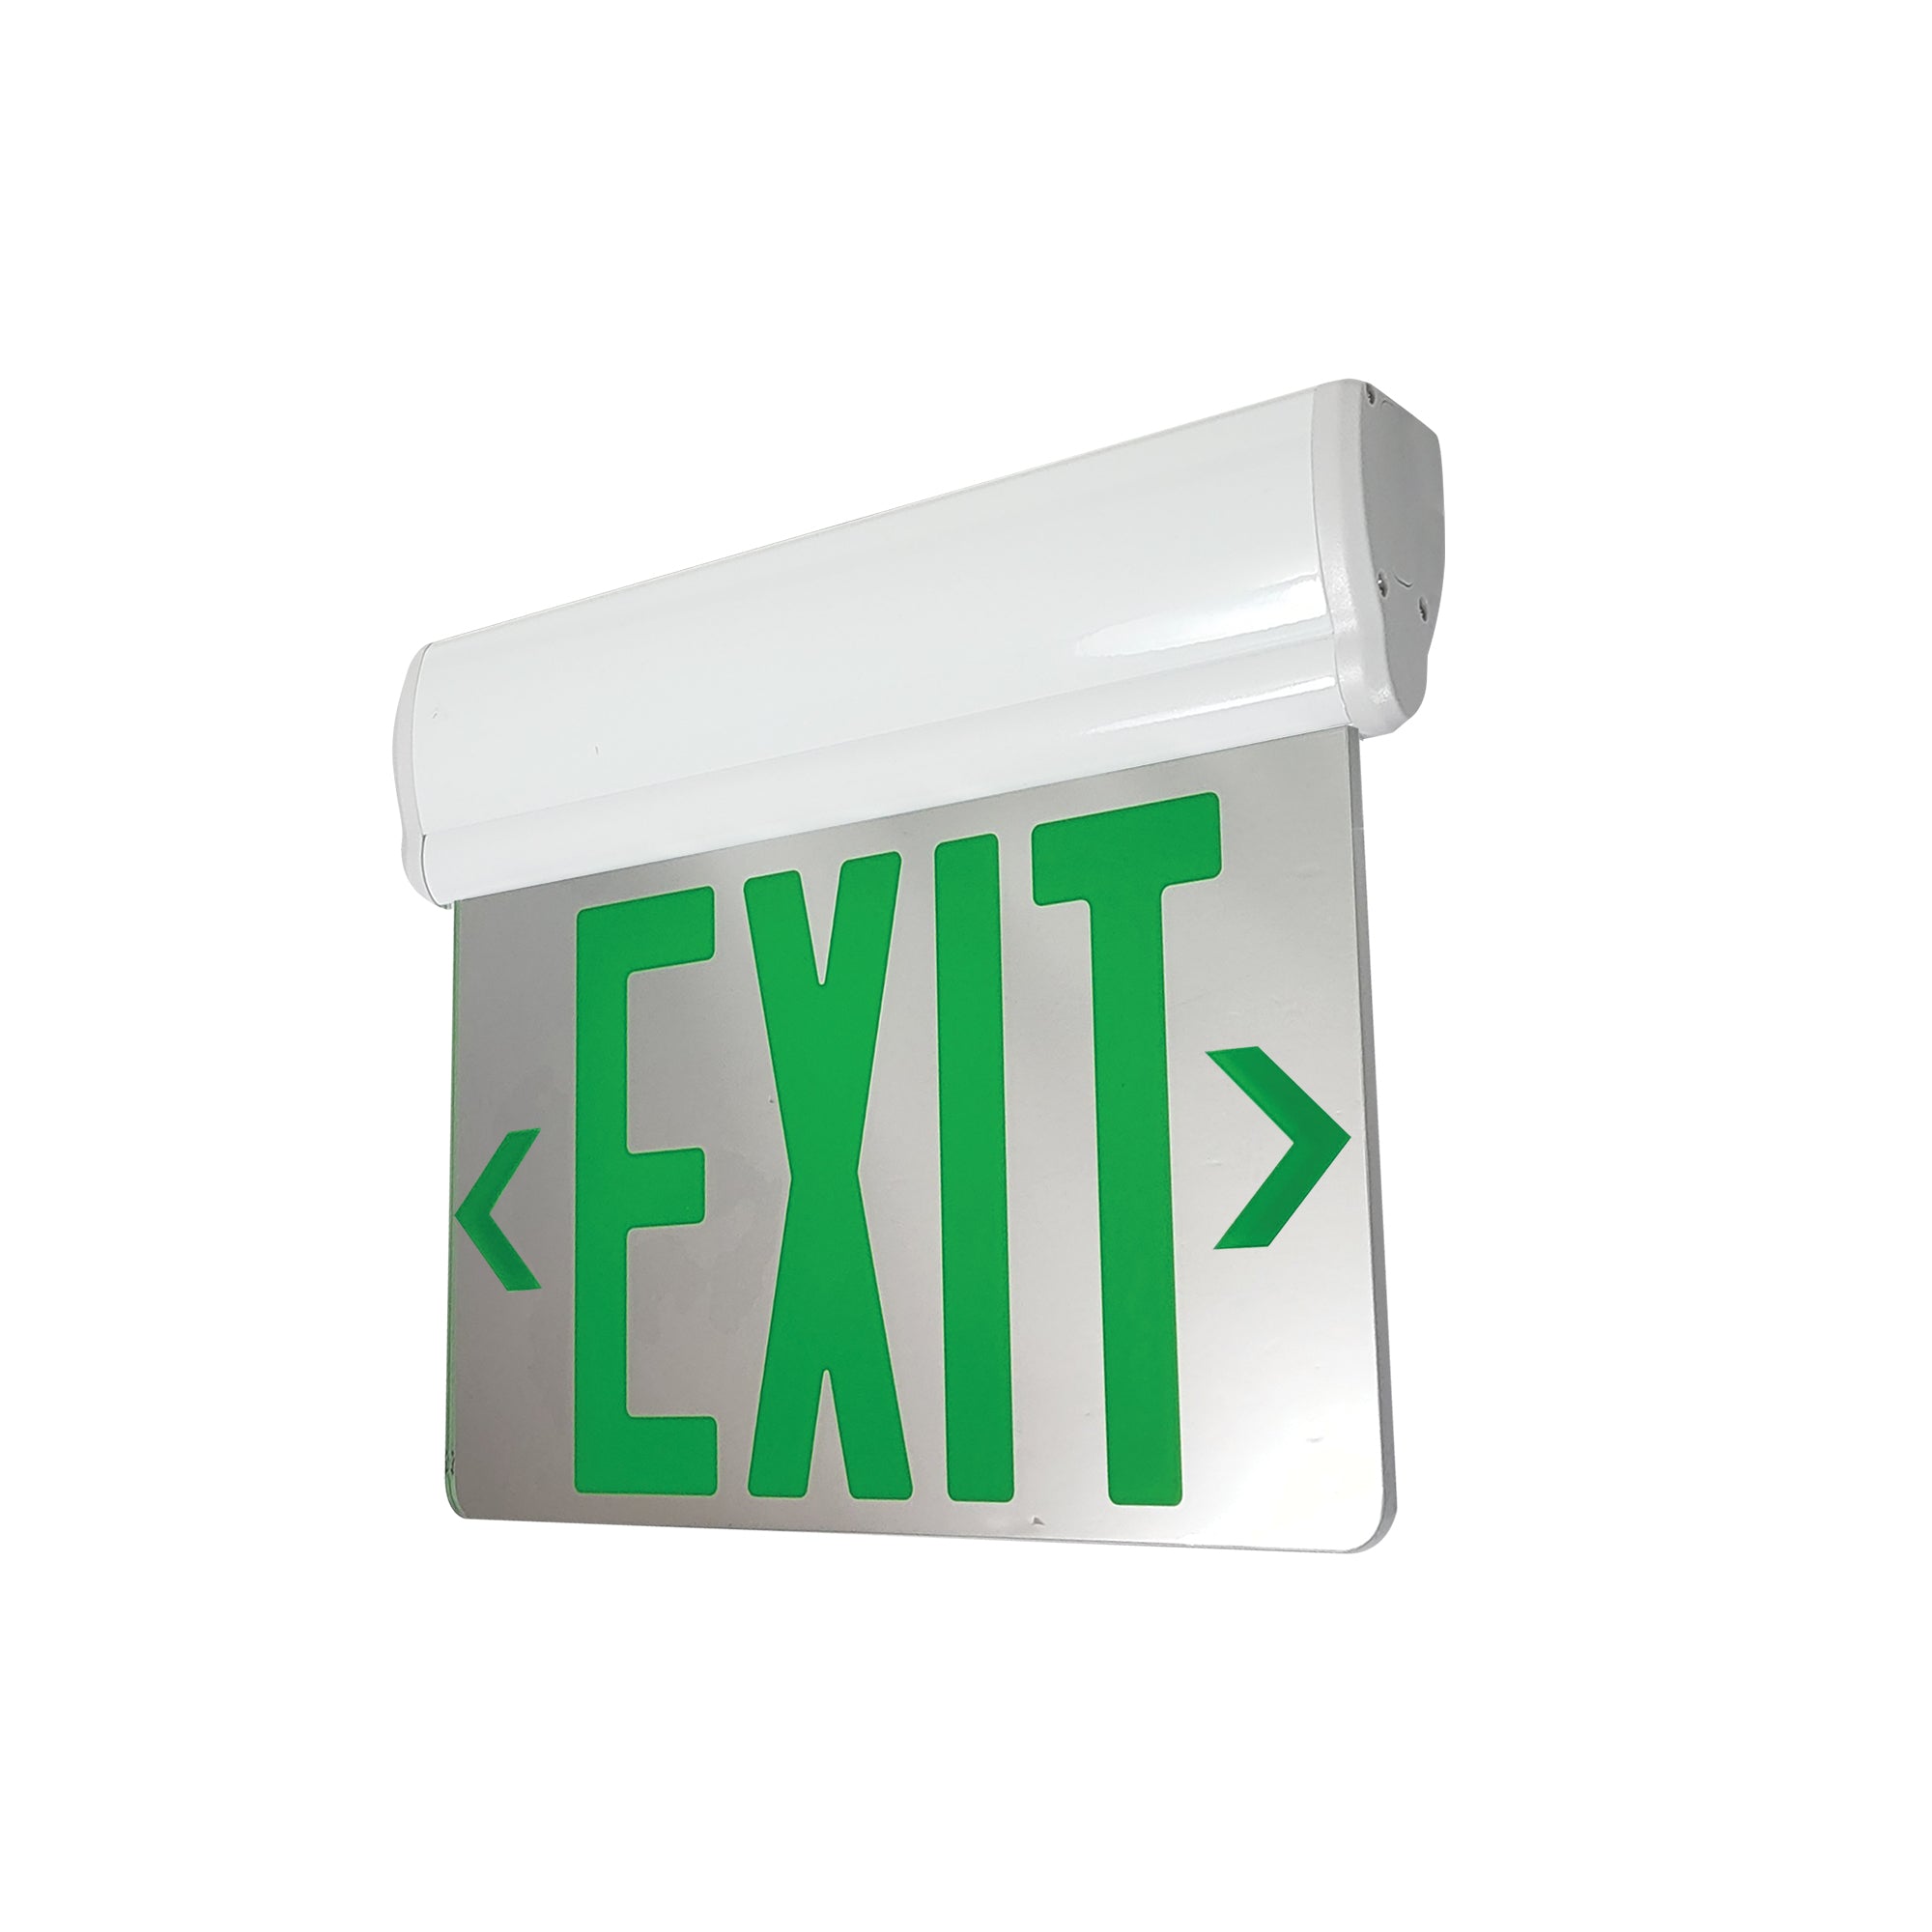 Nora Lighting NX-811-LEDGMW - Exit / Emergency - Surface Adjustable LED Edge-Lit Exit Sign, 2 Circuit, 6 Inch Green Letters, Single Face / Mirrored Acrylic, White Housing